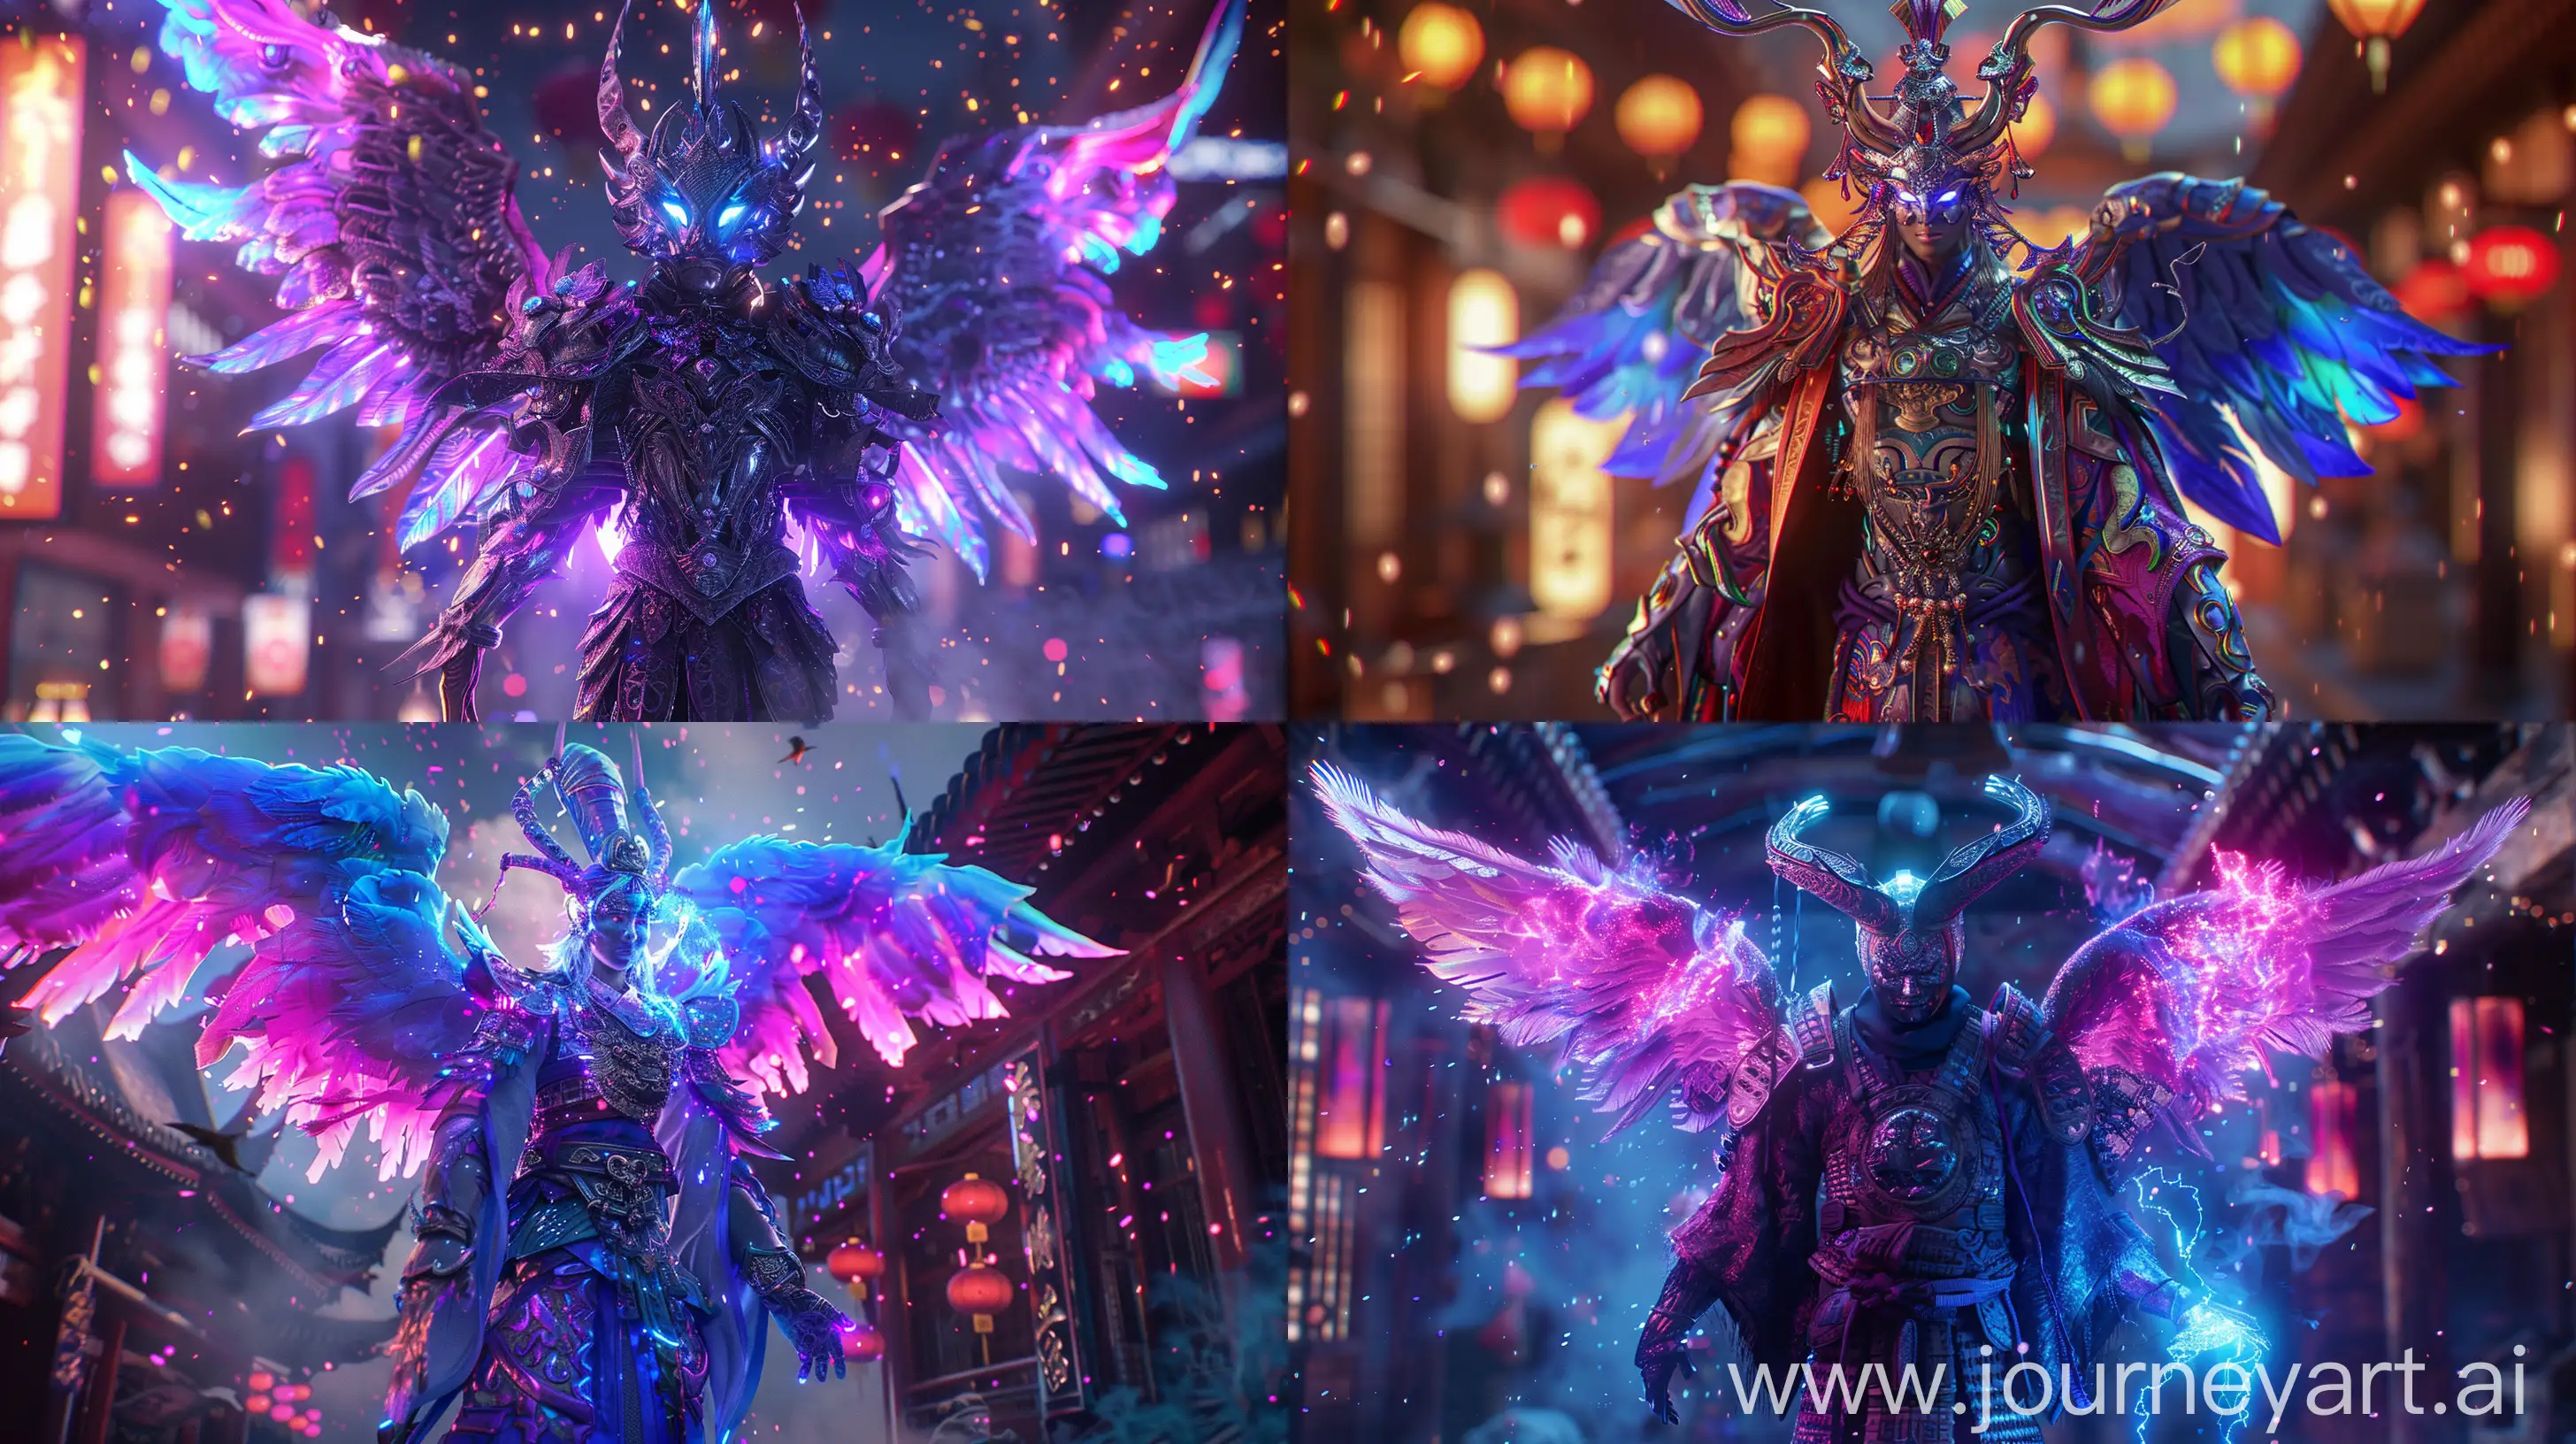 6Winged-Spawn-in-Venetian-Mask-and-Clothing-Cinematic-Purple-and-Blue-Neon-Armor